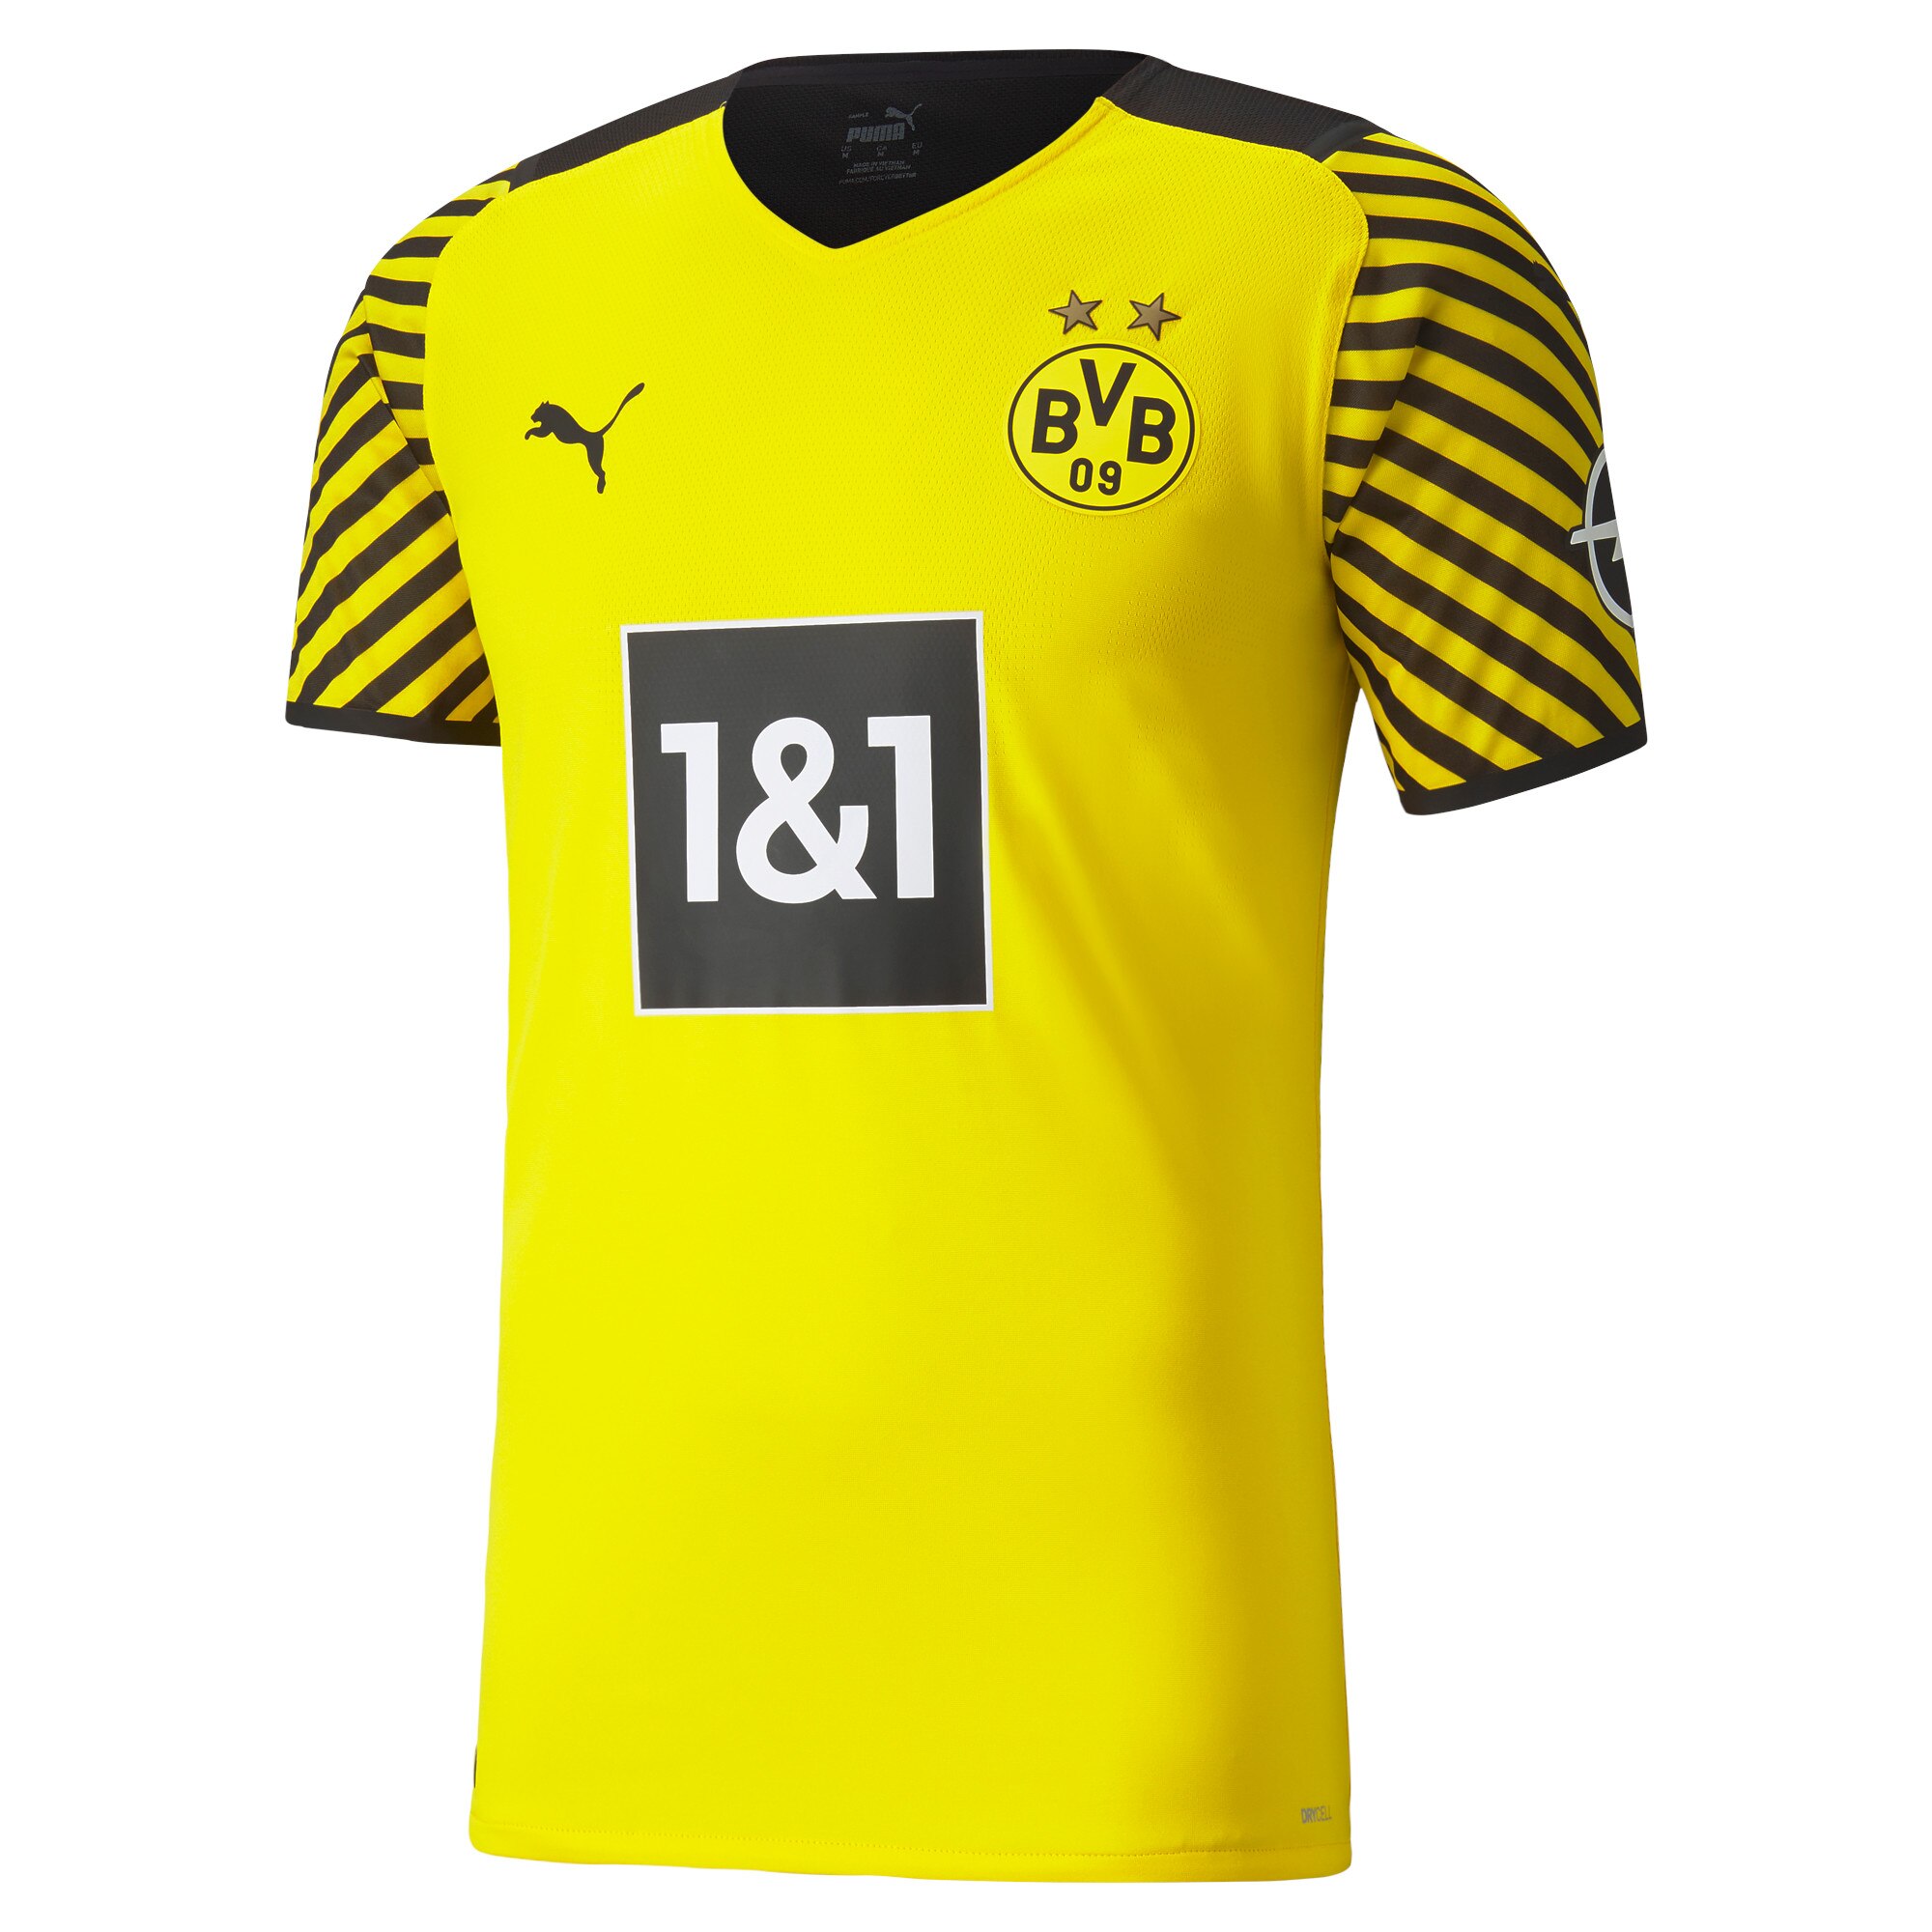 Borussia Dortmund Home Authentic Shirt 2021-22 with Hummels 15 printing